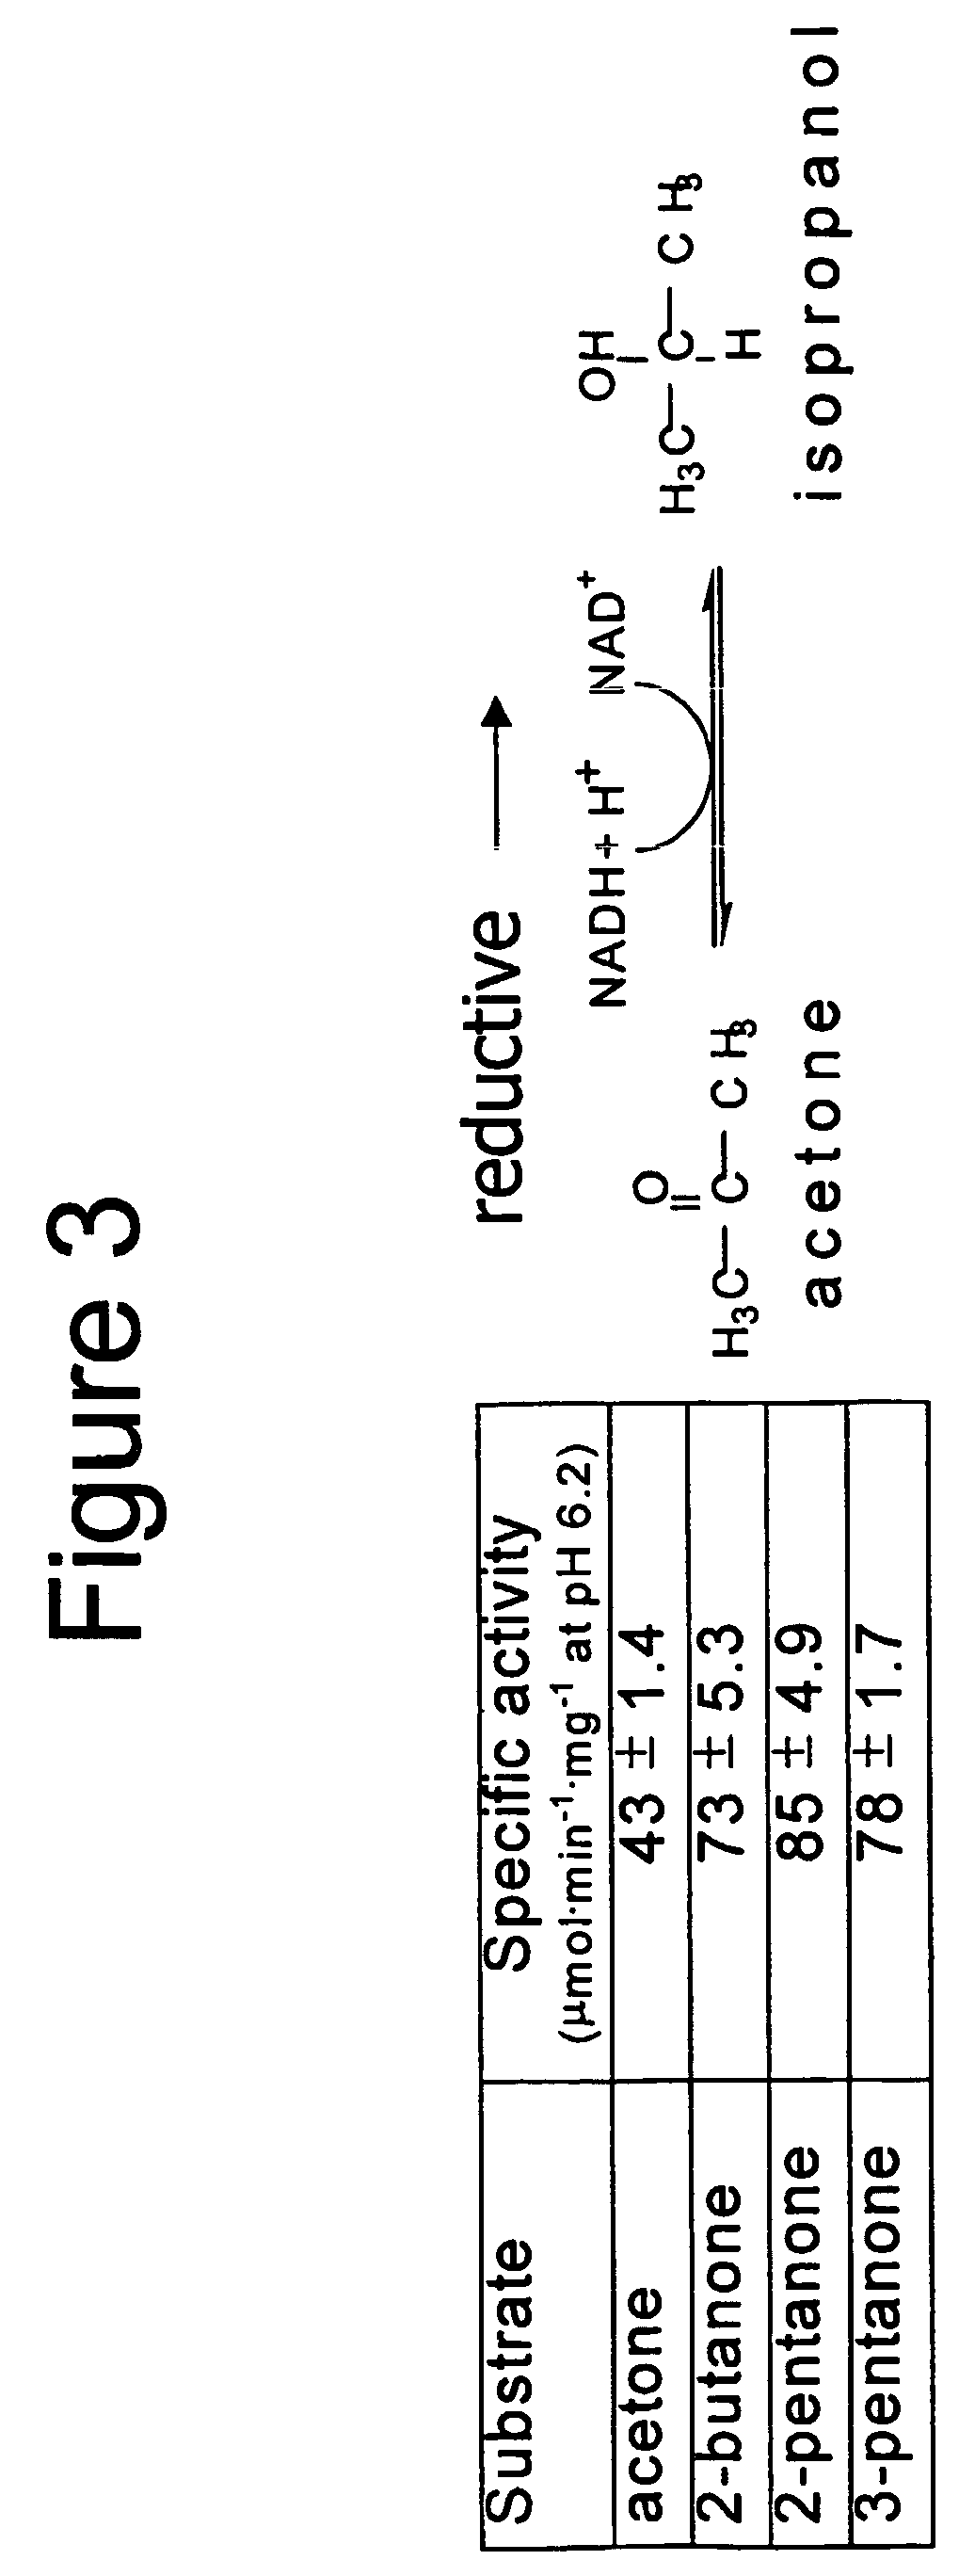 Enzyme-based system and sensor for measuring acetone